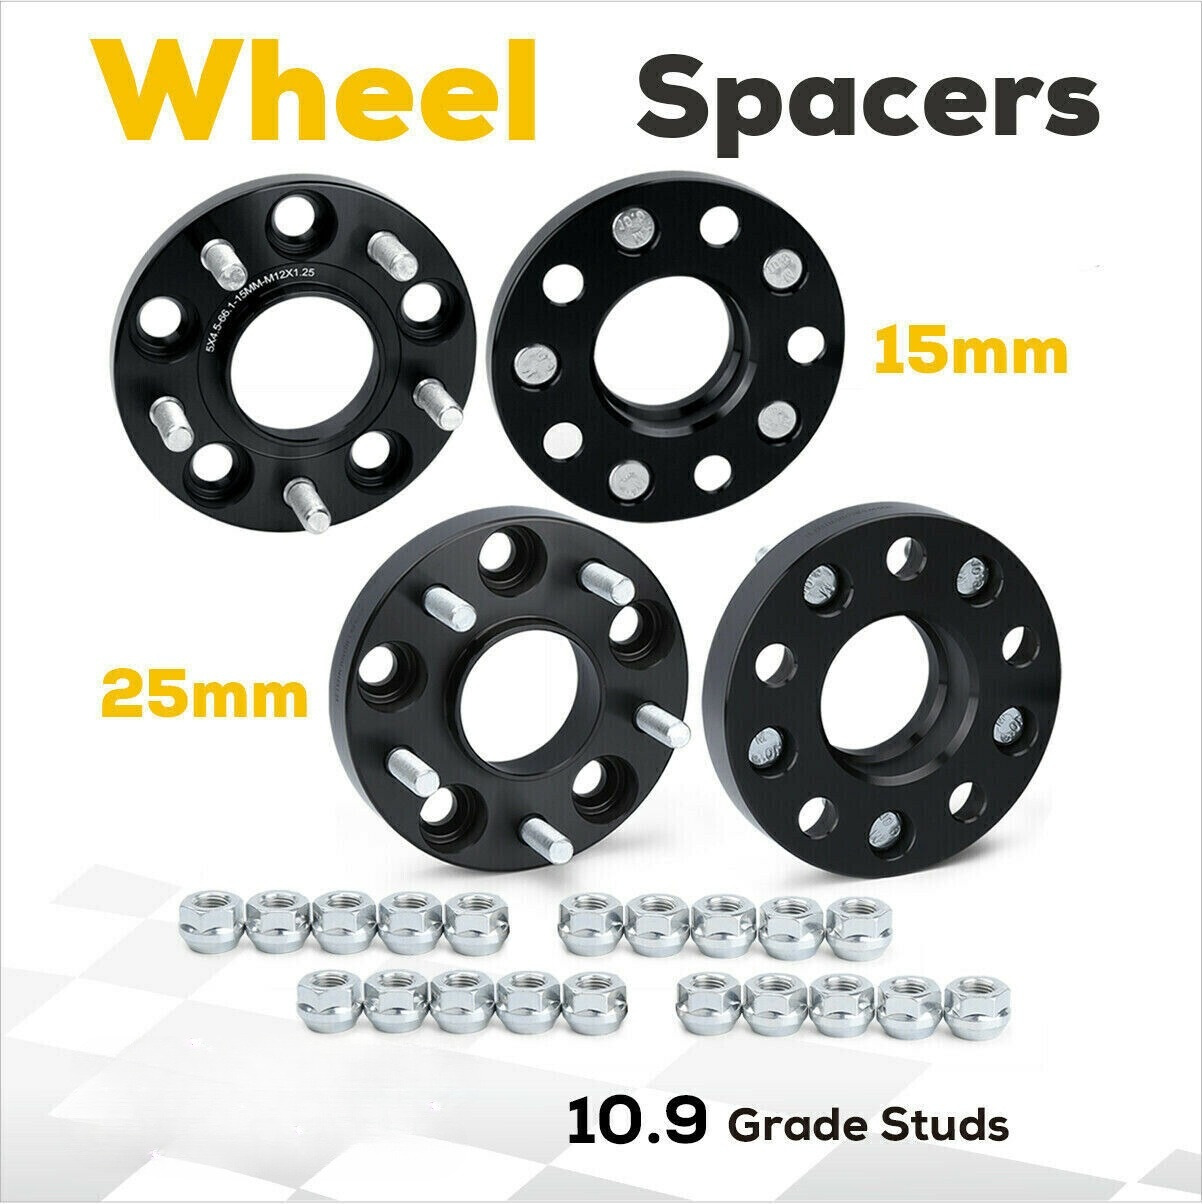 15mm + 25mm 5x4.5 to 5x114.3 Wheel Spacers For Nissan 370Z 350Z Infiniti G37 G35